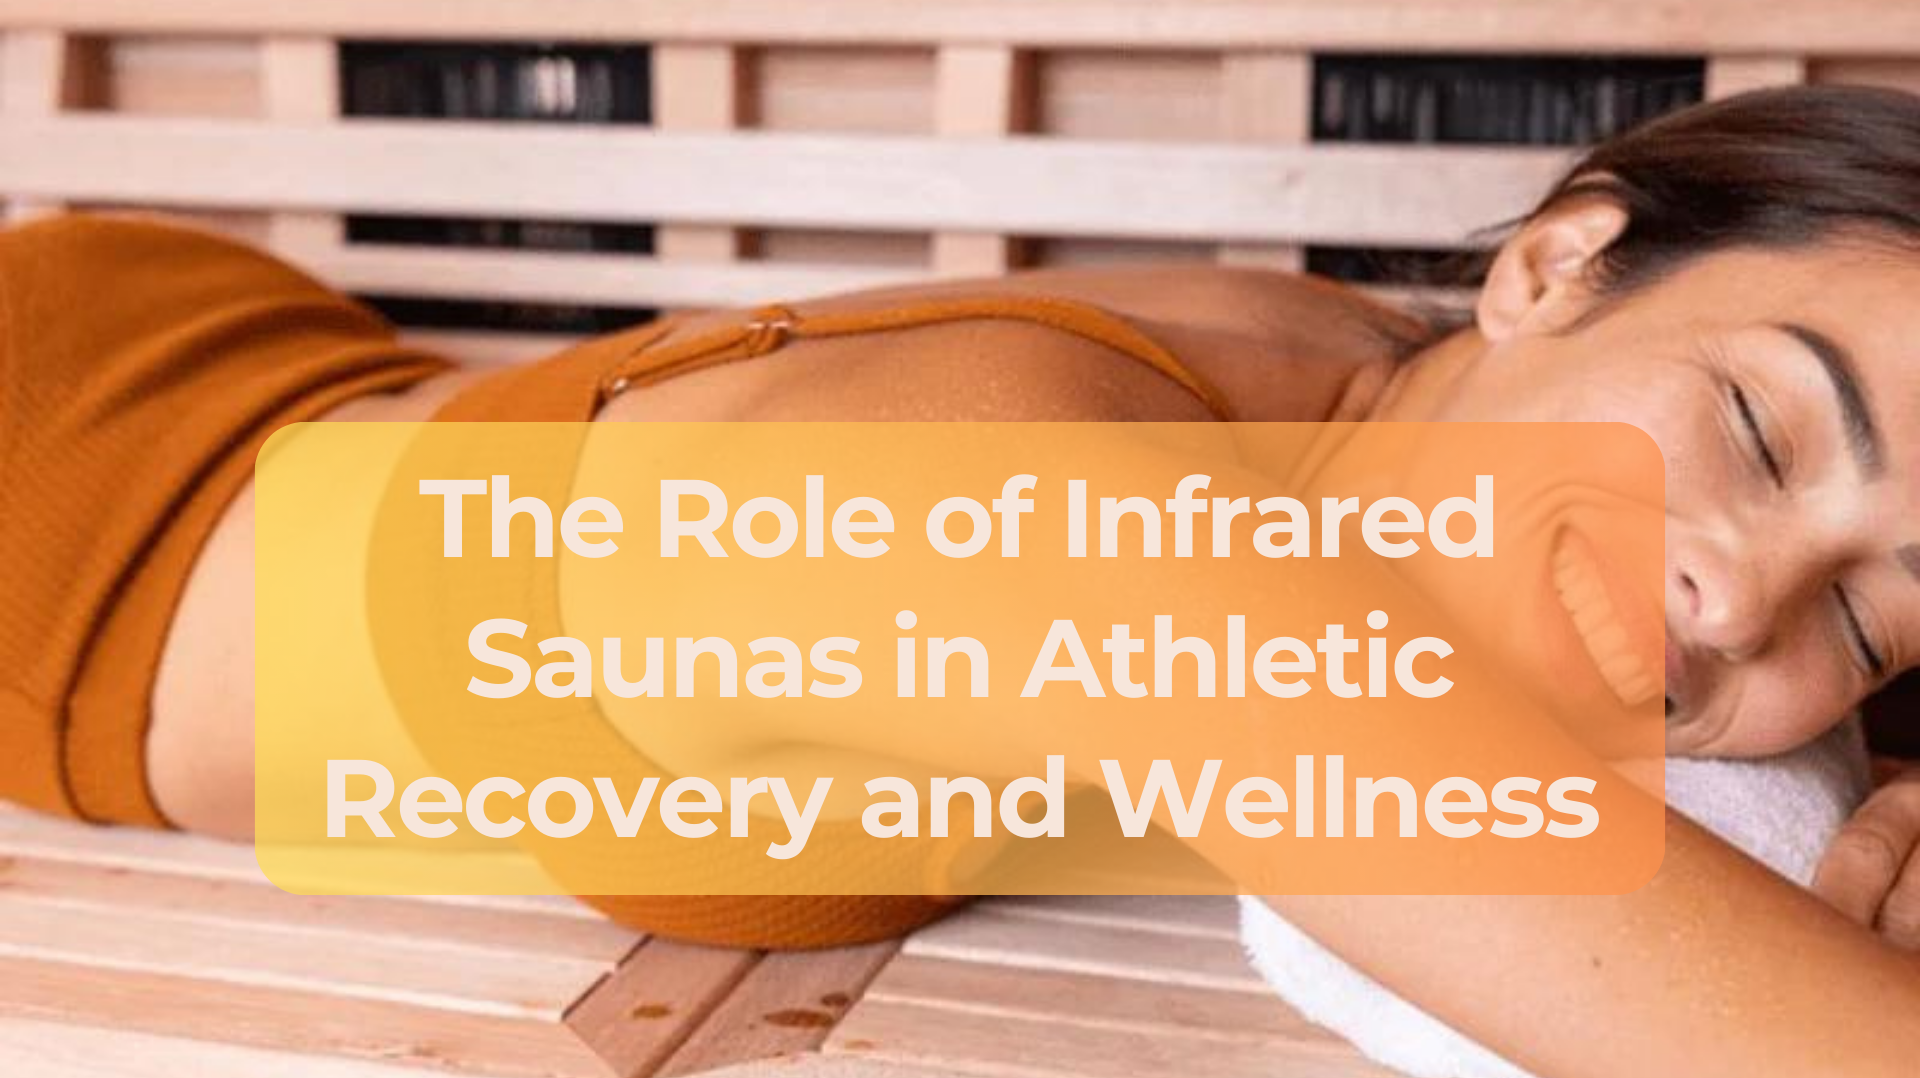 Why Infrared Saunas Are Good For Your Recovery and Wellness